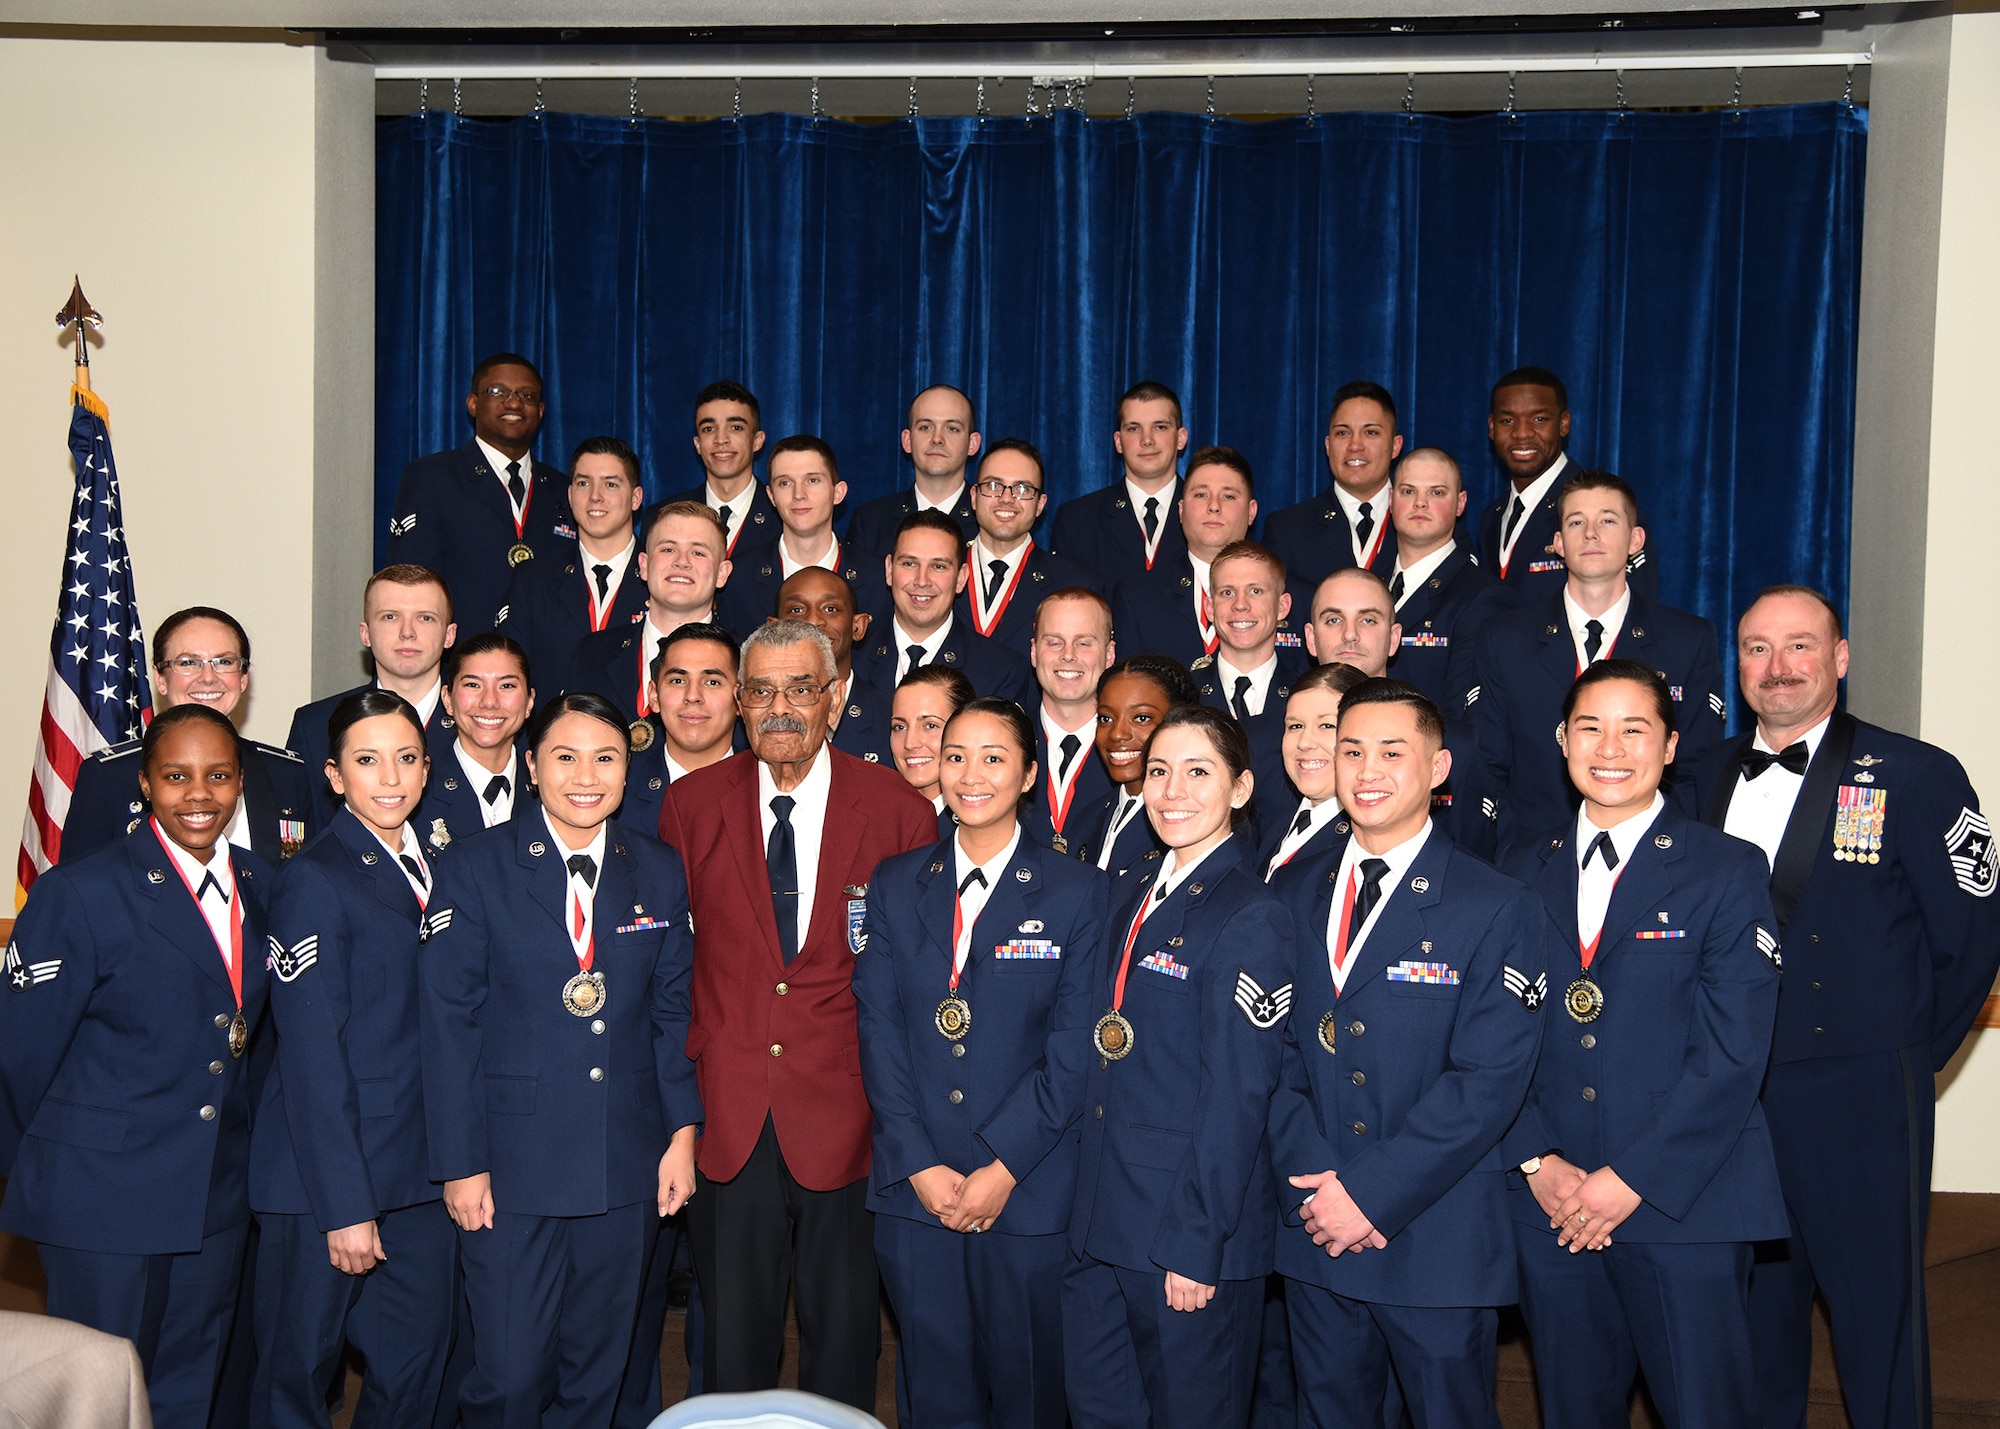 Col. Stacy Jo Huser, 90th Missile Wing commander, Chief Master Sgt. Kristian Farve, 90th Missile Wing Command Chief, and special guest speaker and Tuskegee Airman Frank Macon pose with the graduating Airman Leadership School Class 19-C students in the Trail's End Event Center on F.E. Warren Air Force Base, Wyo., Feb. 13, 2019. Enlisted Airmen must complete the rigorous professional military education course before supervising other Airmen.